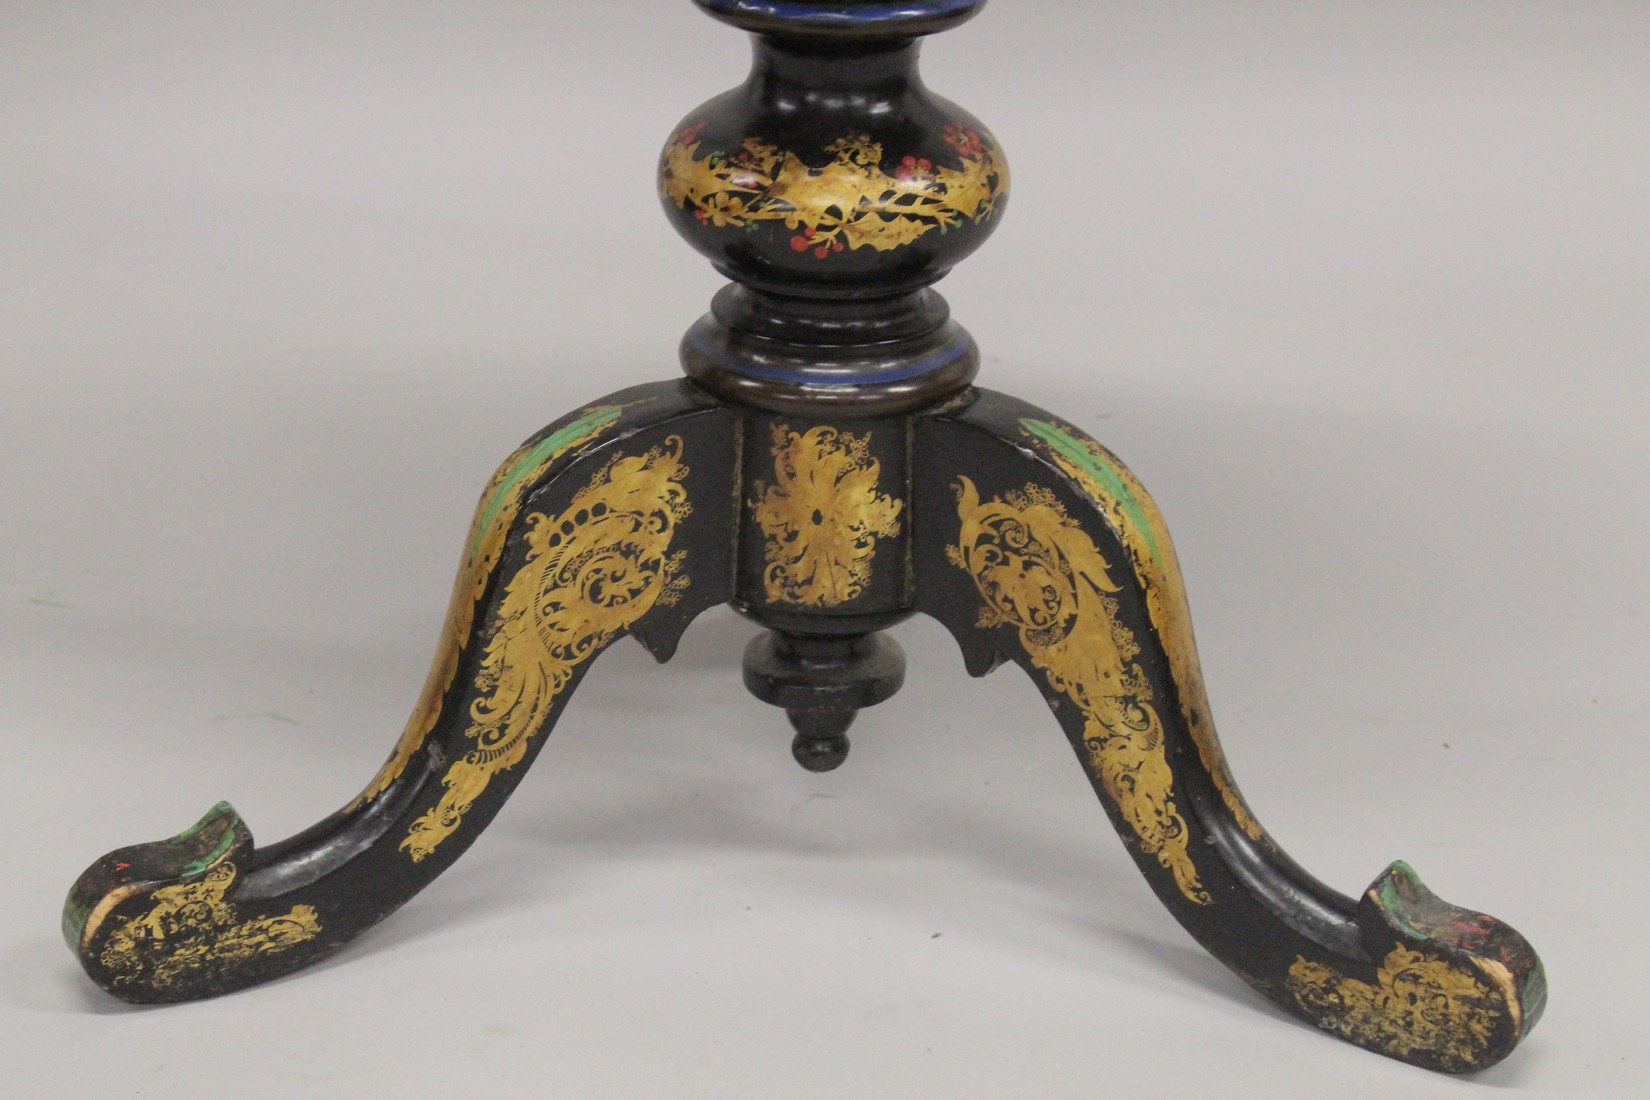 A VICTORIAN PAPIER MACHE TEA POUY ON A TRIPOD BASE, inlaid with mother of pearl and decorated in - Image 6 of 7